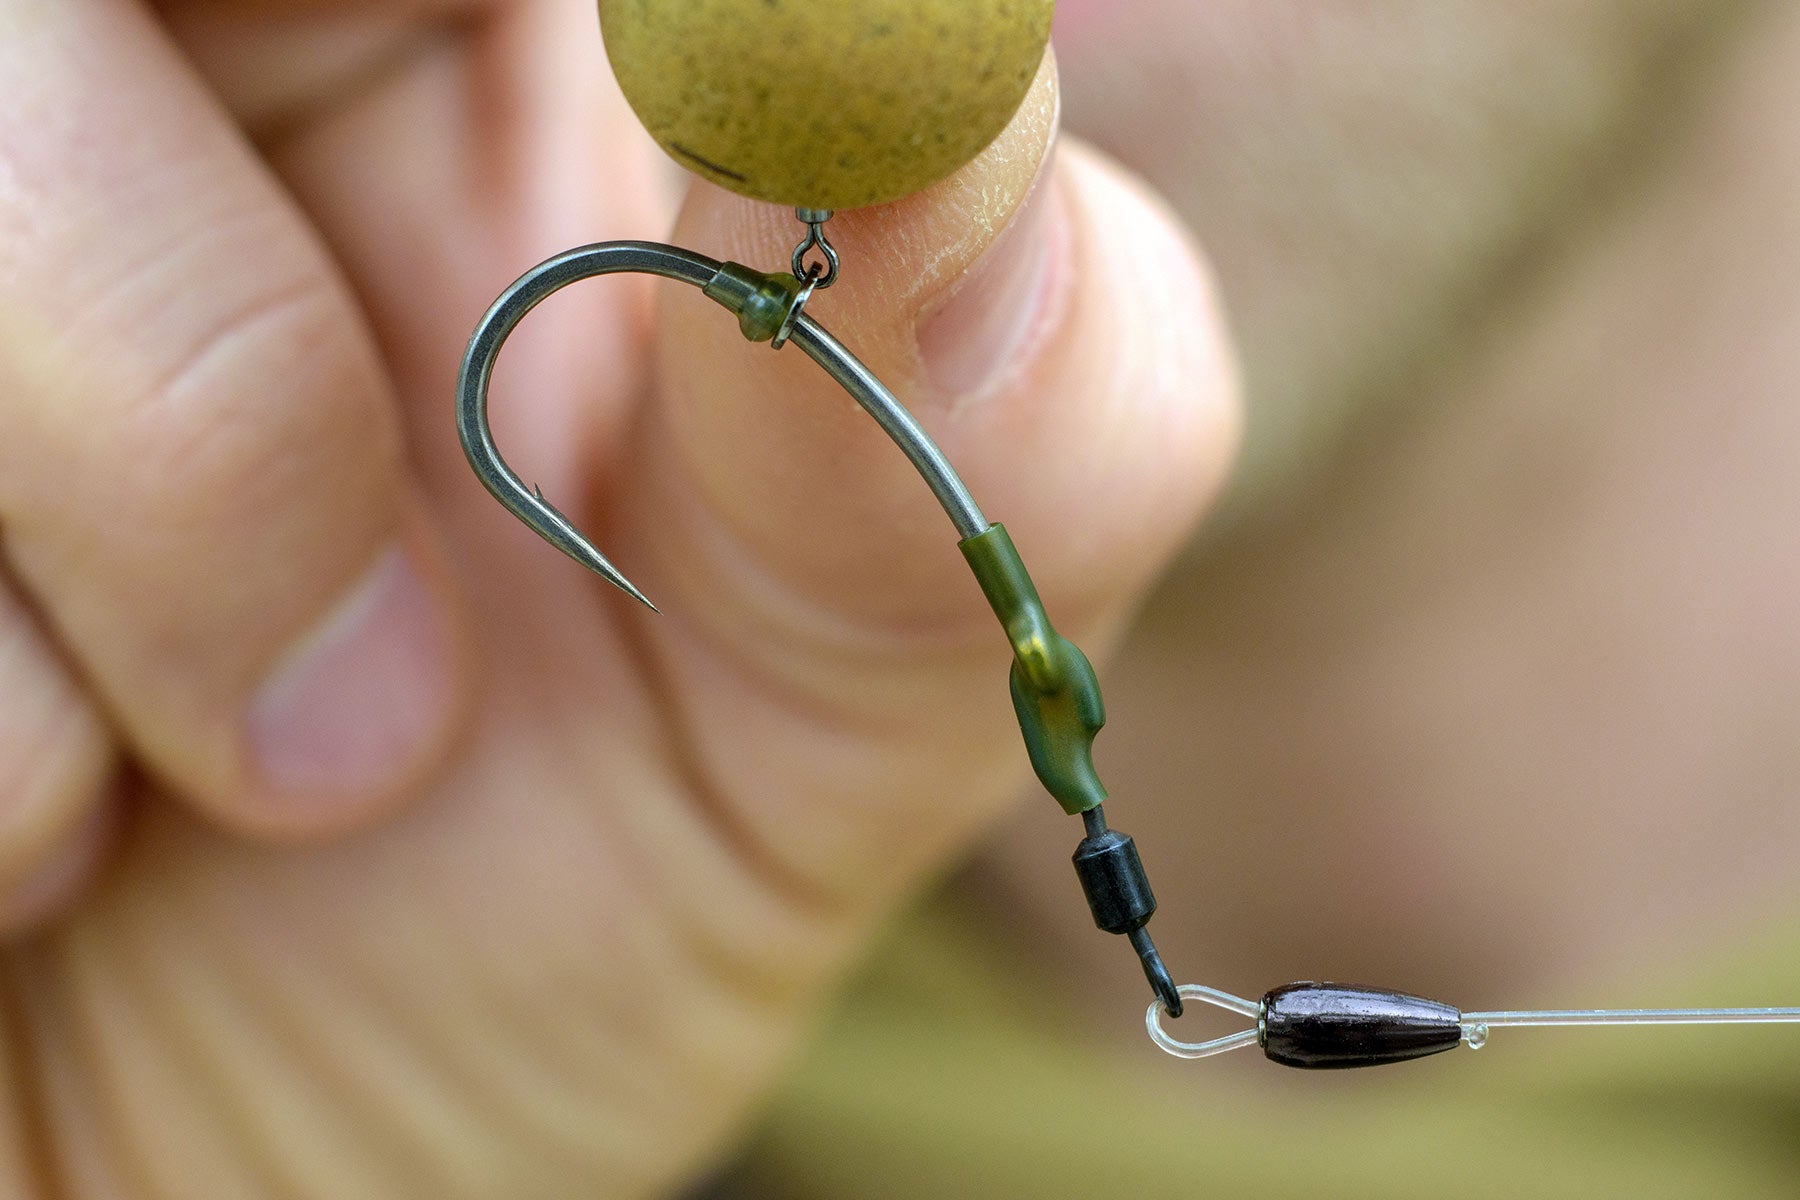 A spinner Rig with 2.4mm Trans green shrink tube and hook bead on a size 2 Duropoint Curve shank hook.